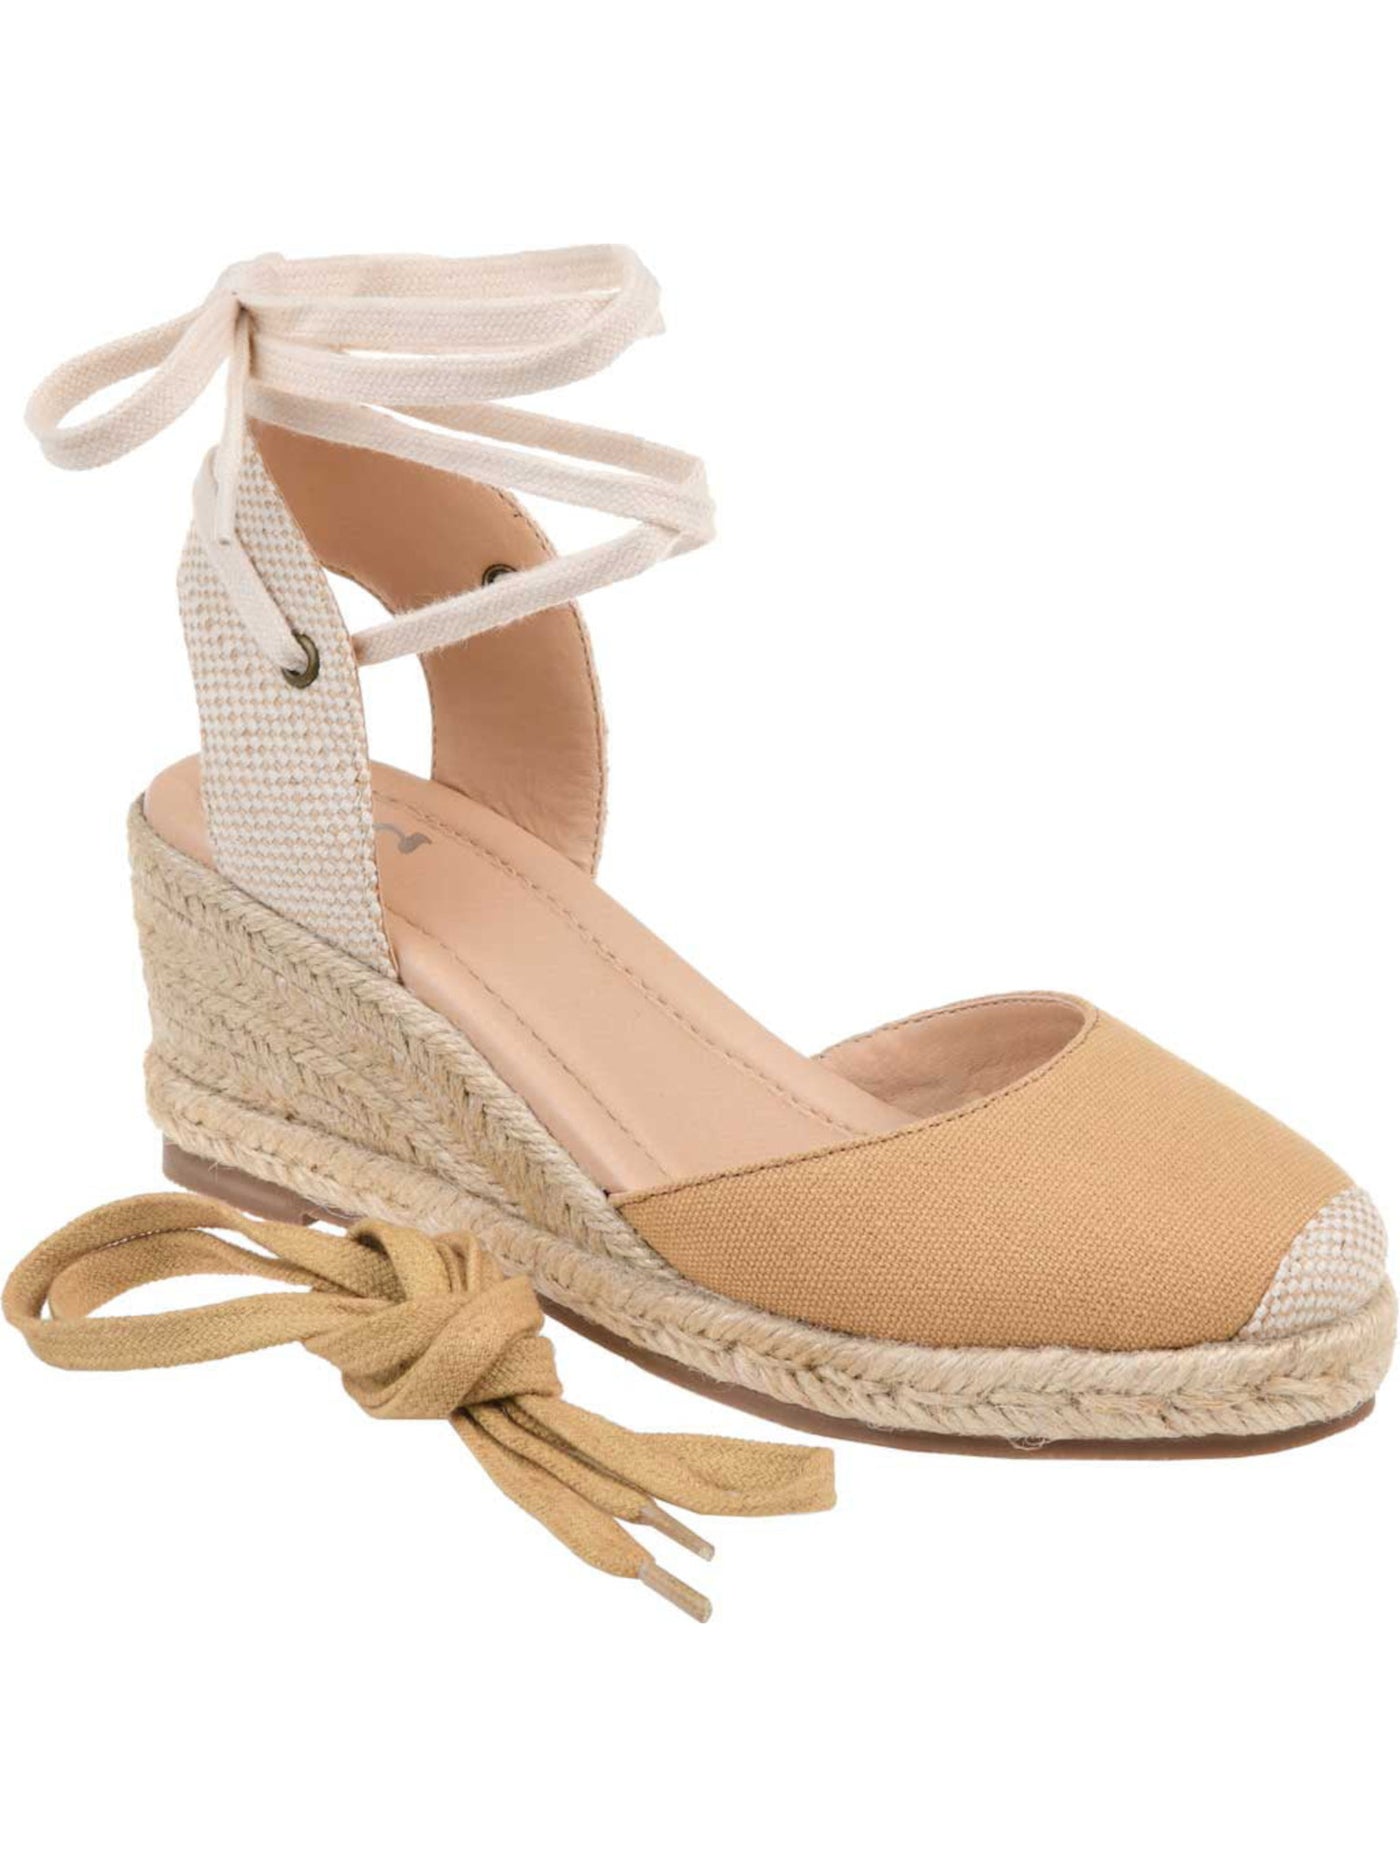 JOURNEE COLLECTION Womens Beige 1/2" Platform Interchangeable Laces Jute Wrapped Open Back Shoe Padded Monte Round Toe Wedge Lace-Up Espadrille Shoes 8 M